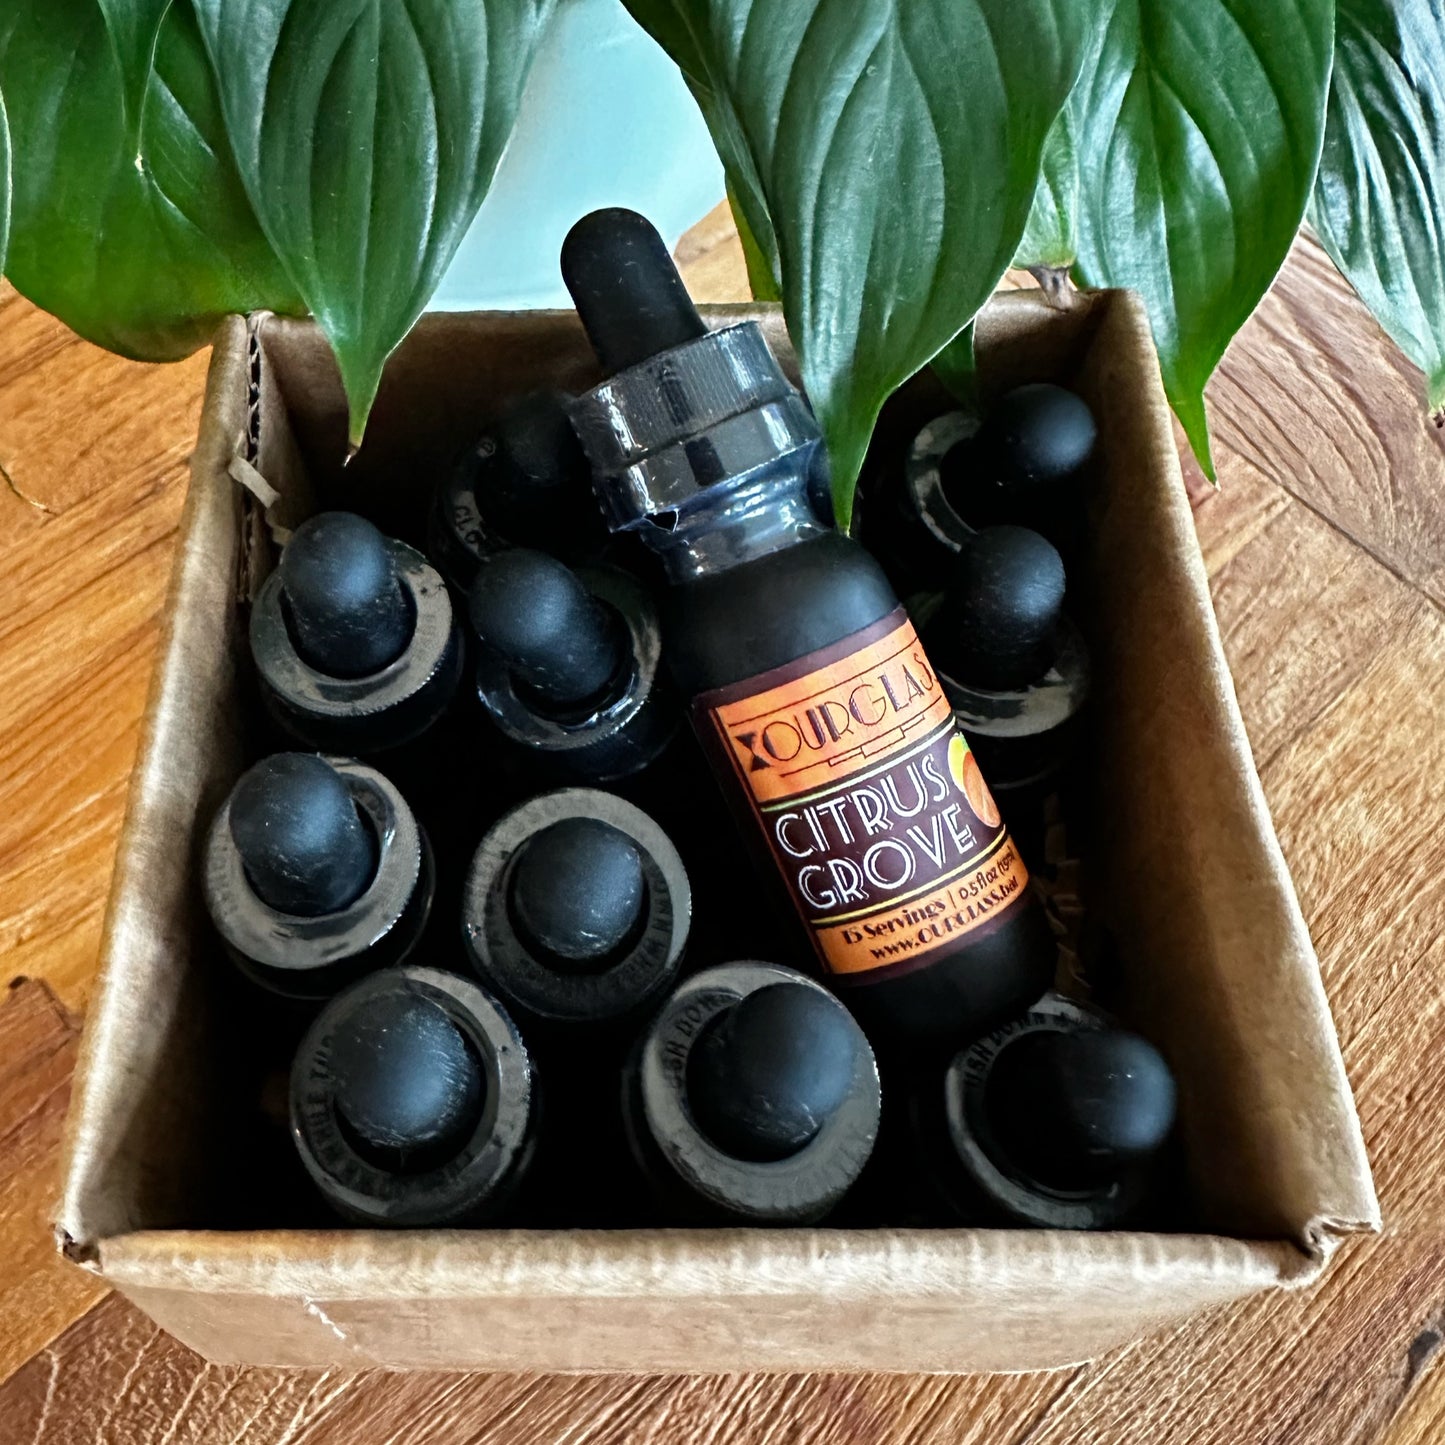 OURGLASS: A case of citrus grove flavored delta 9 drops for drinks, featuring a collection of thc tincture bottles ready for a refreshing experience.